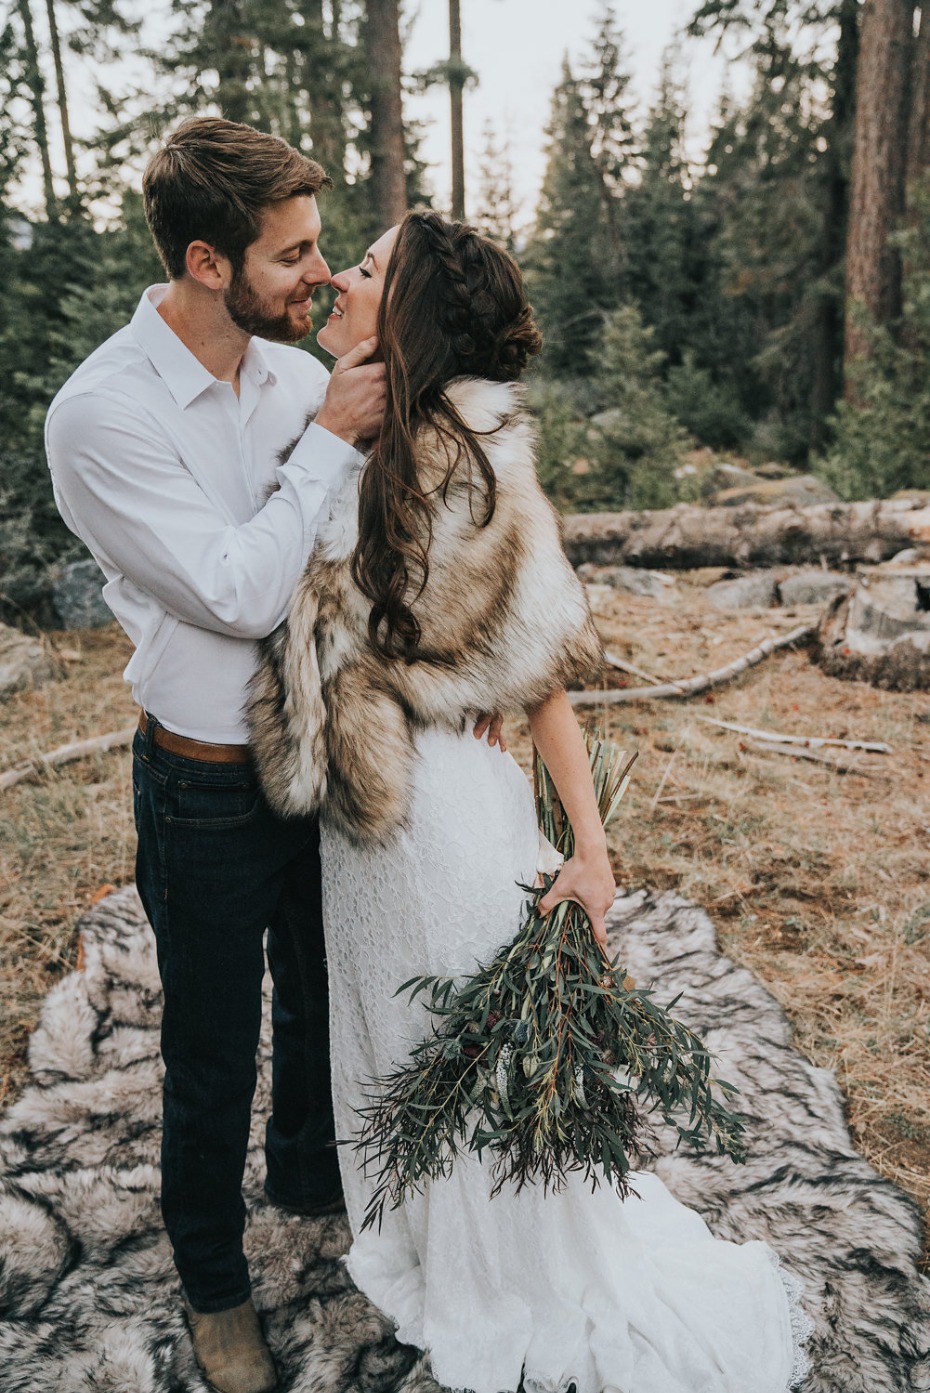 bride and groom in mountain chic wedding attire